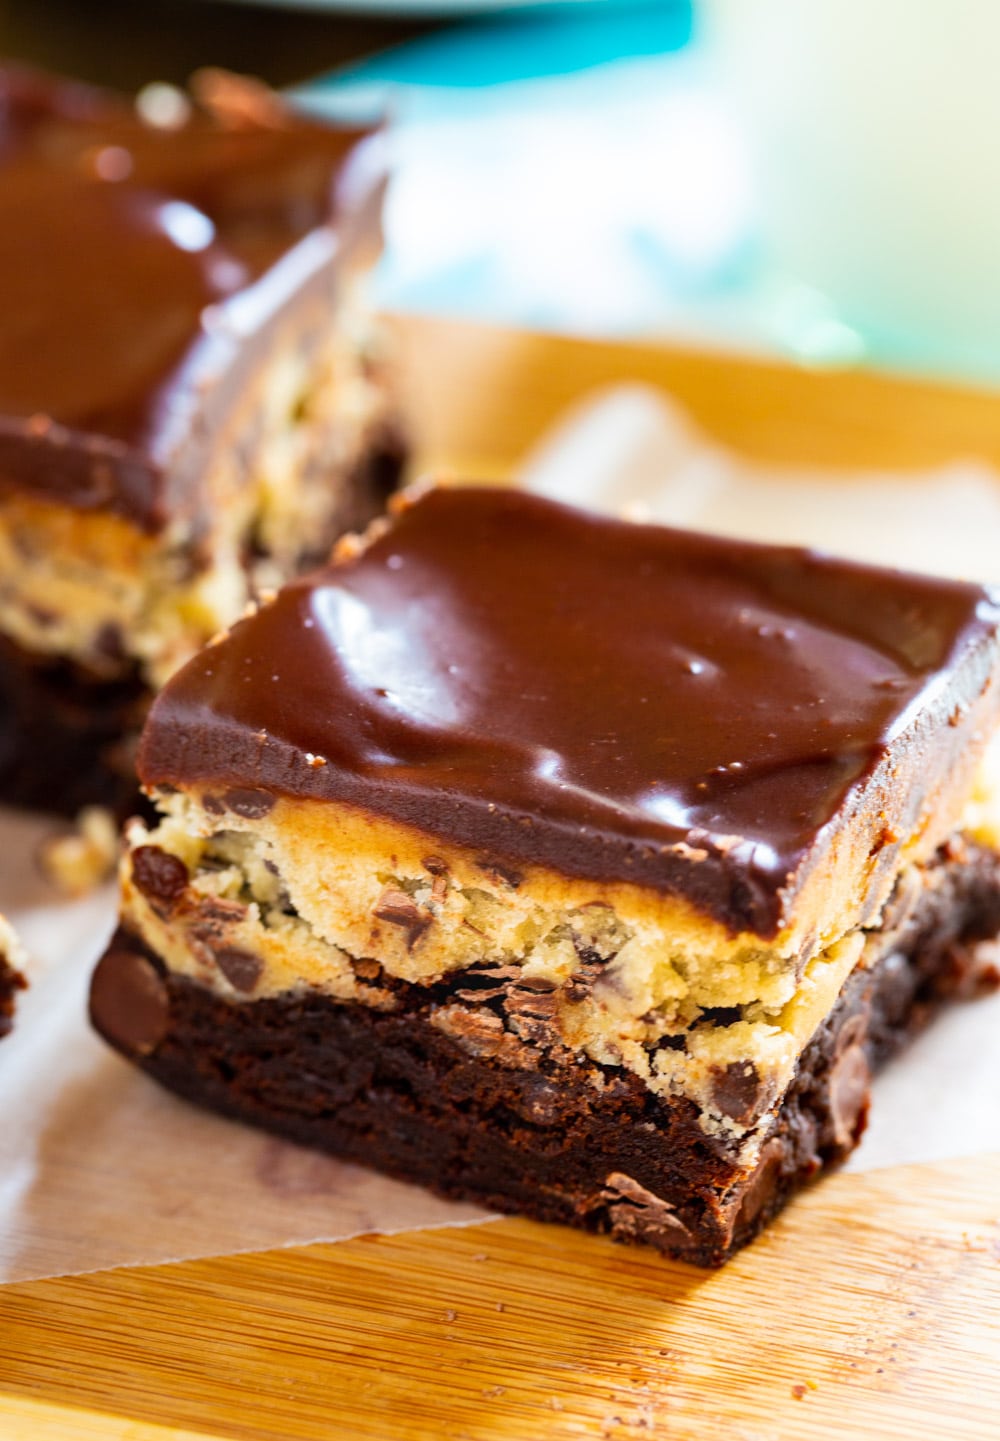 Cookie Dough Brownie close-up.